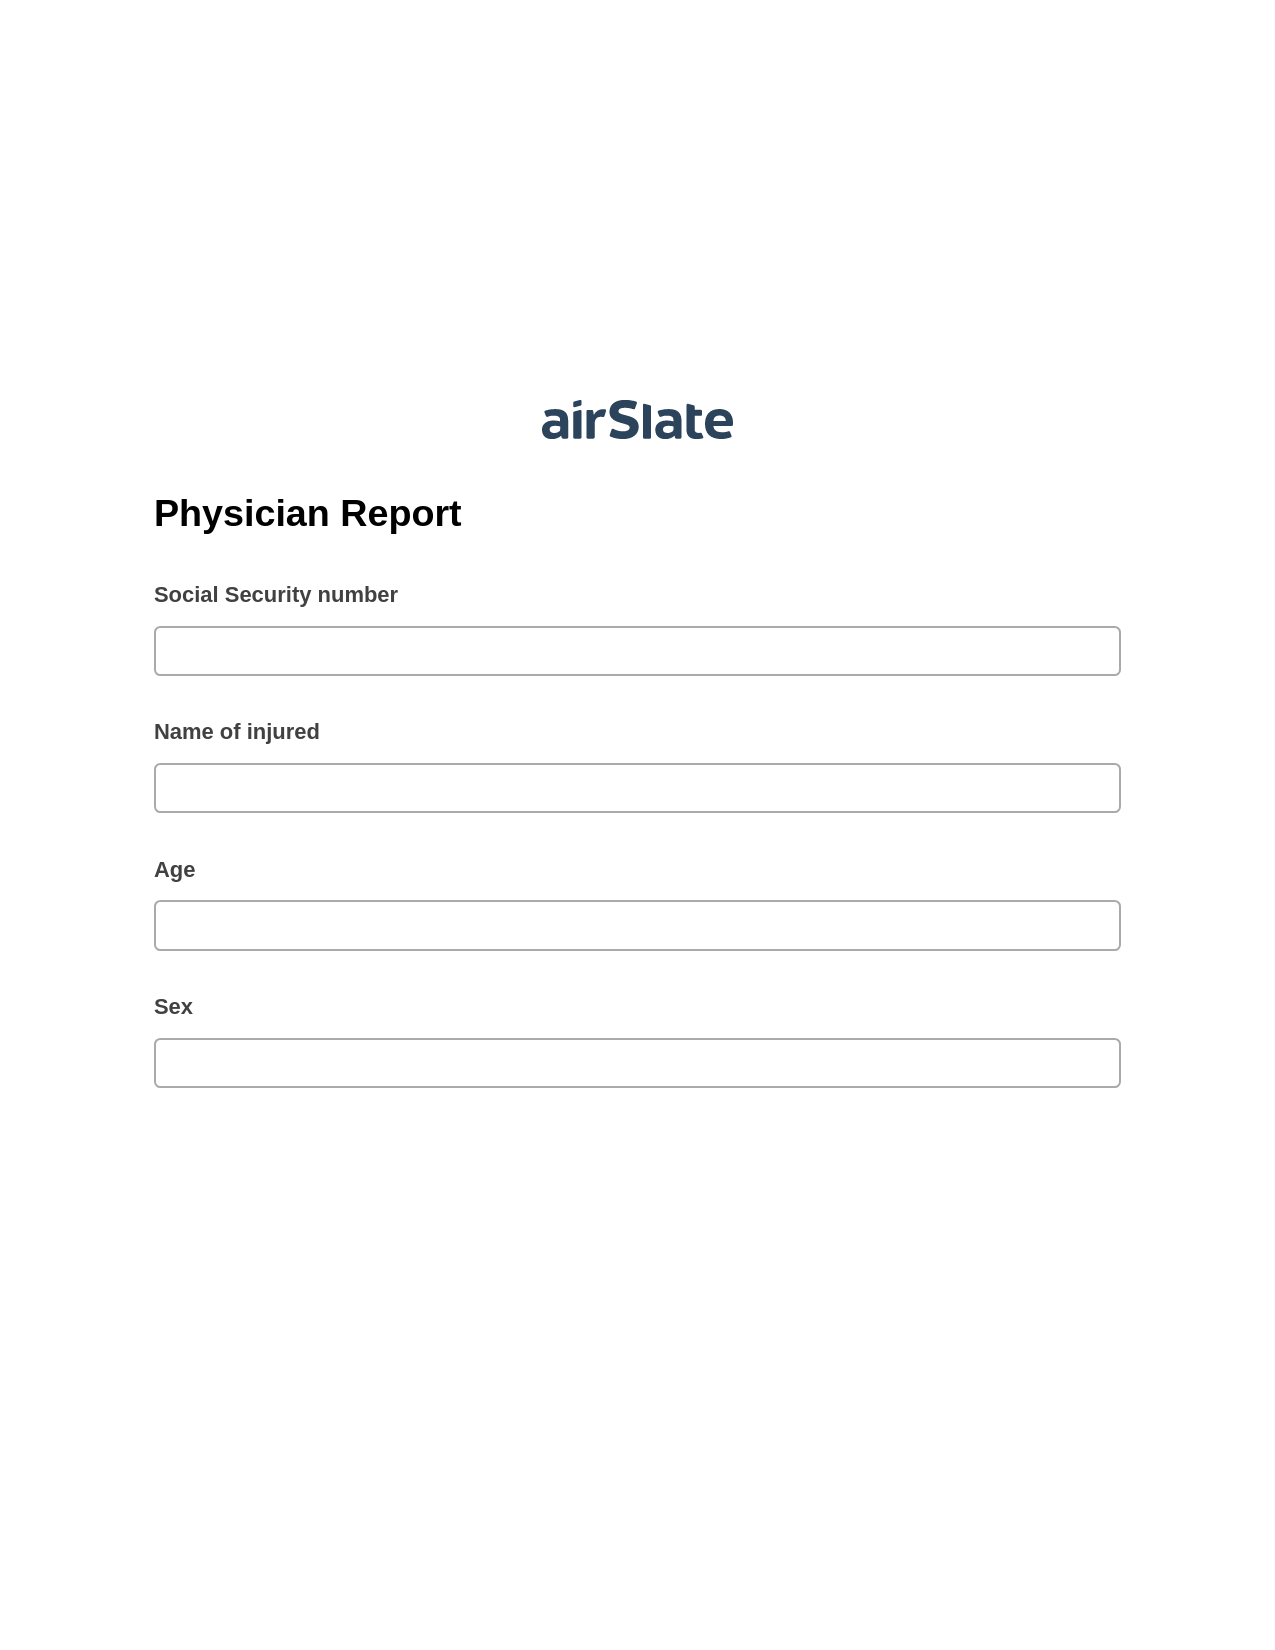 Multirole Physician Report Pre-fill from CSV File Bot, Unassign Role Bot, Export to Google Sheet Bot